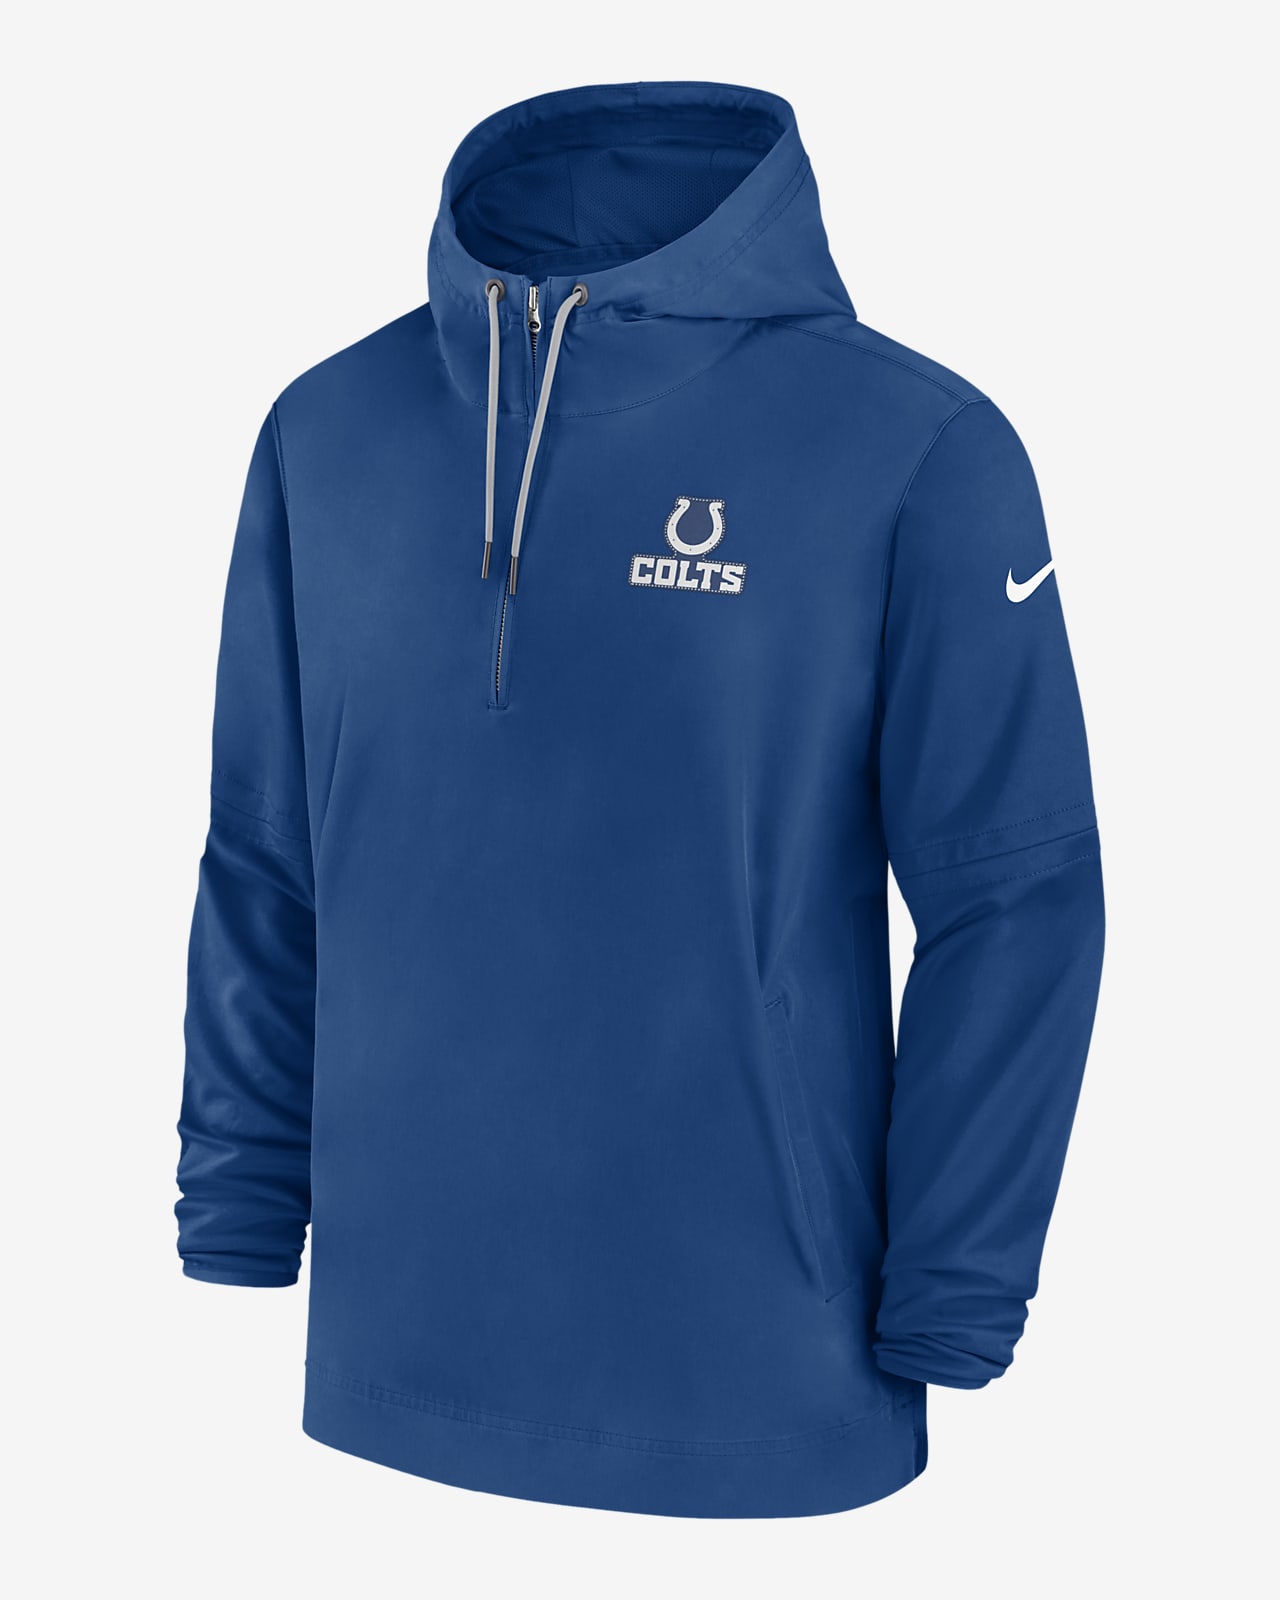 indianapolis colts nike hoodie